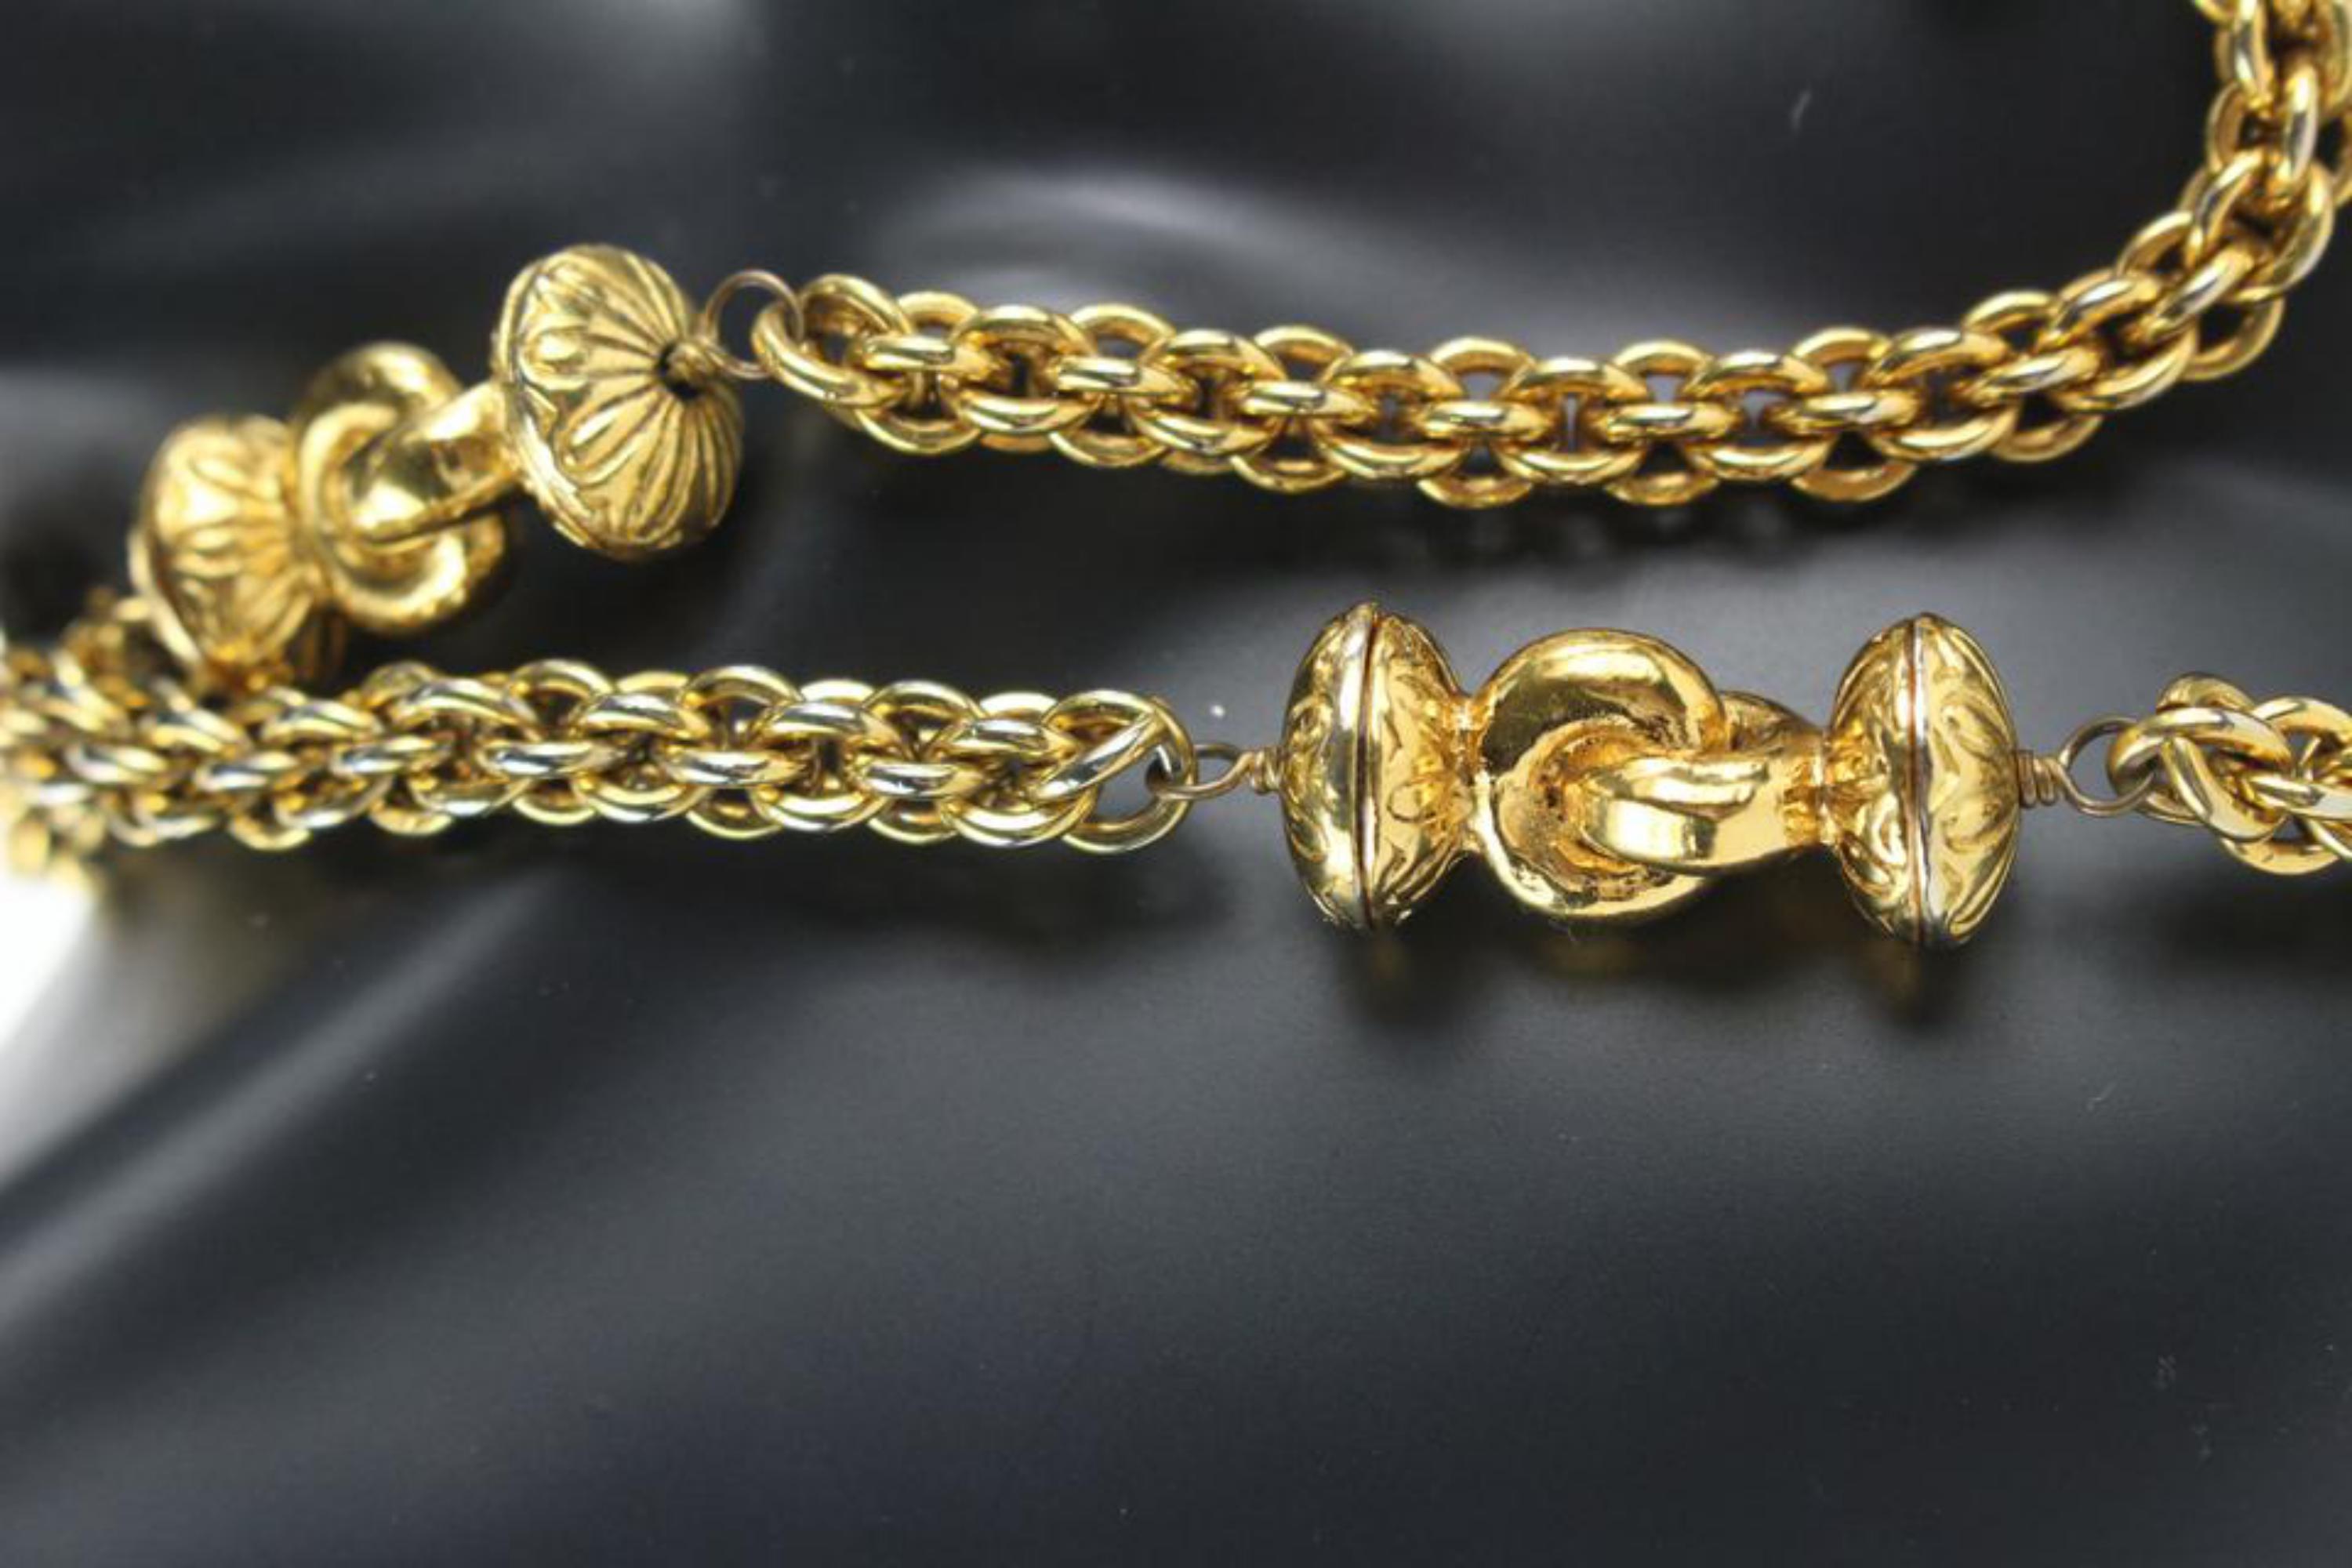 Chanel Rare Vintage Lamb Chain Link Twist Necklace 2CA1022 In Good Condition For Sale In Dix hills, NY